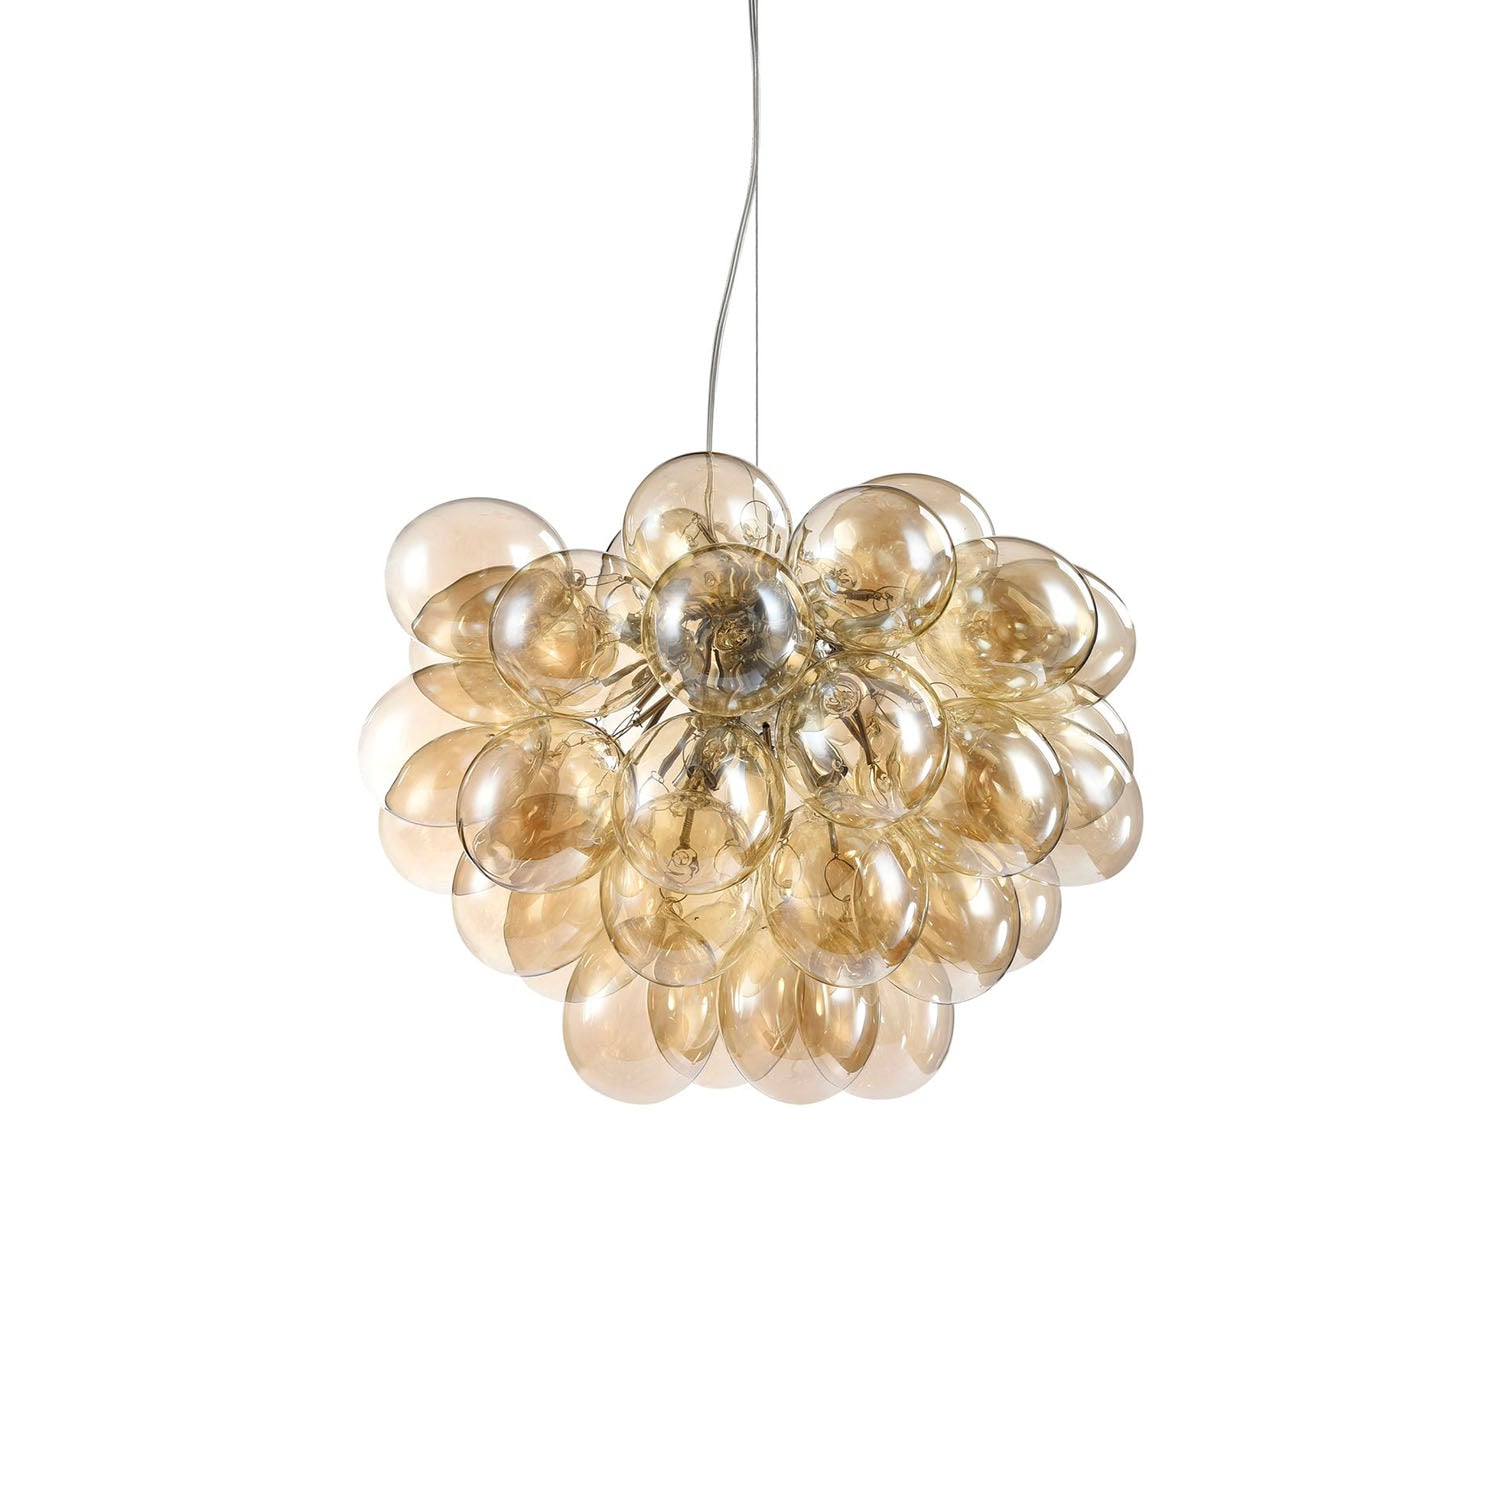 BALBO - Cluster chandelier in smoked or amber glass for dining room